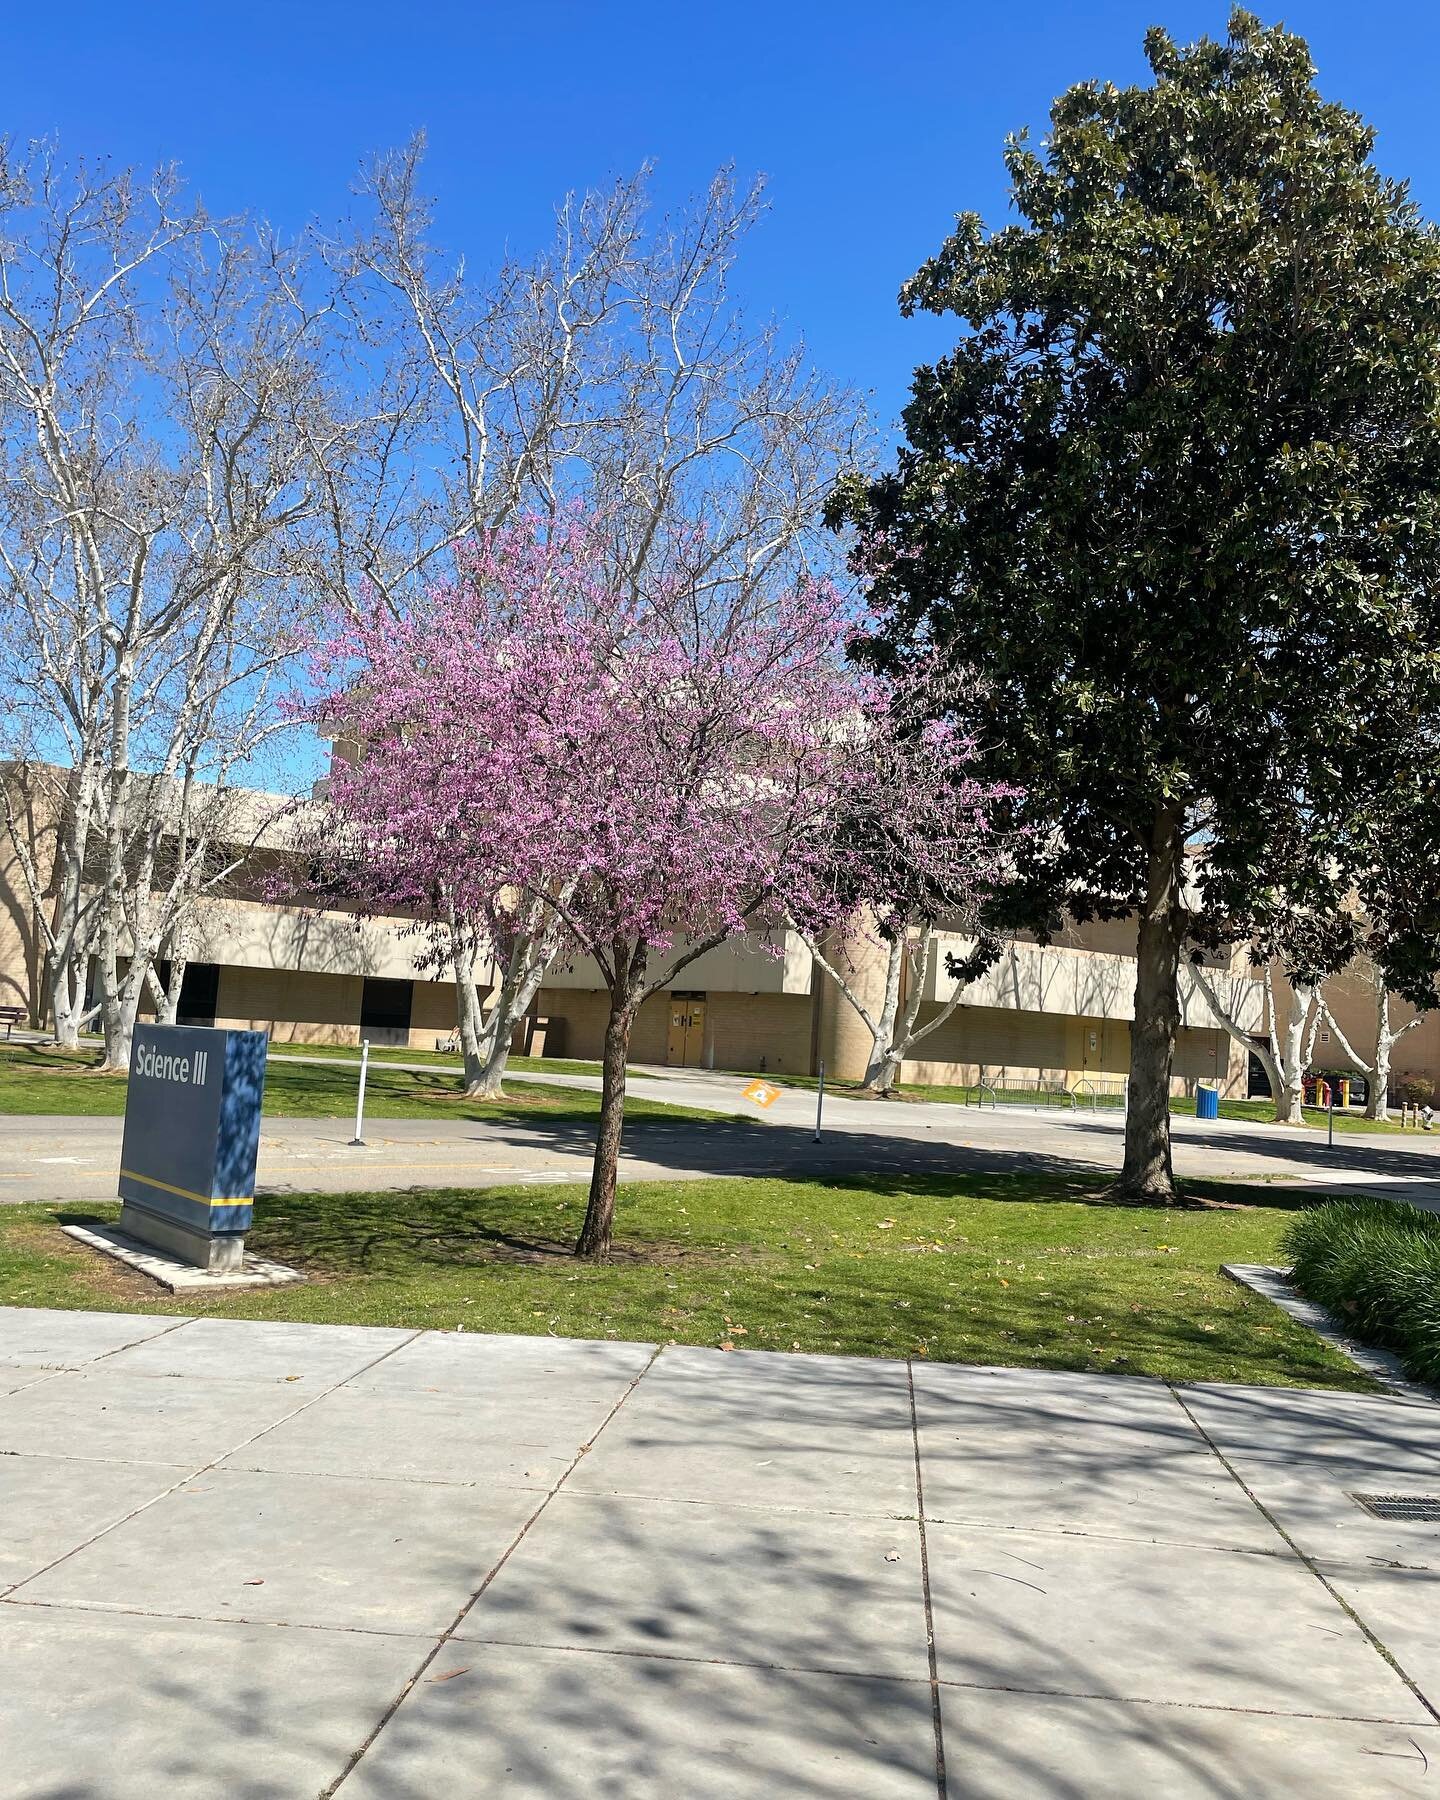 A beautiful day to guest lecture on Self-Compassion and Curiosity! #mentalhealth #selfcompassion @csubakersfield @csubalumni